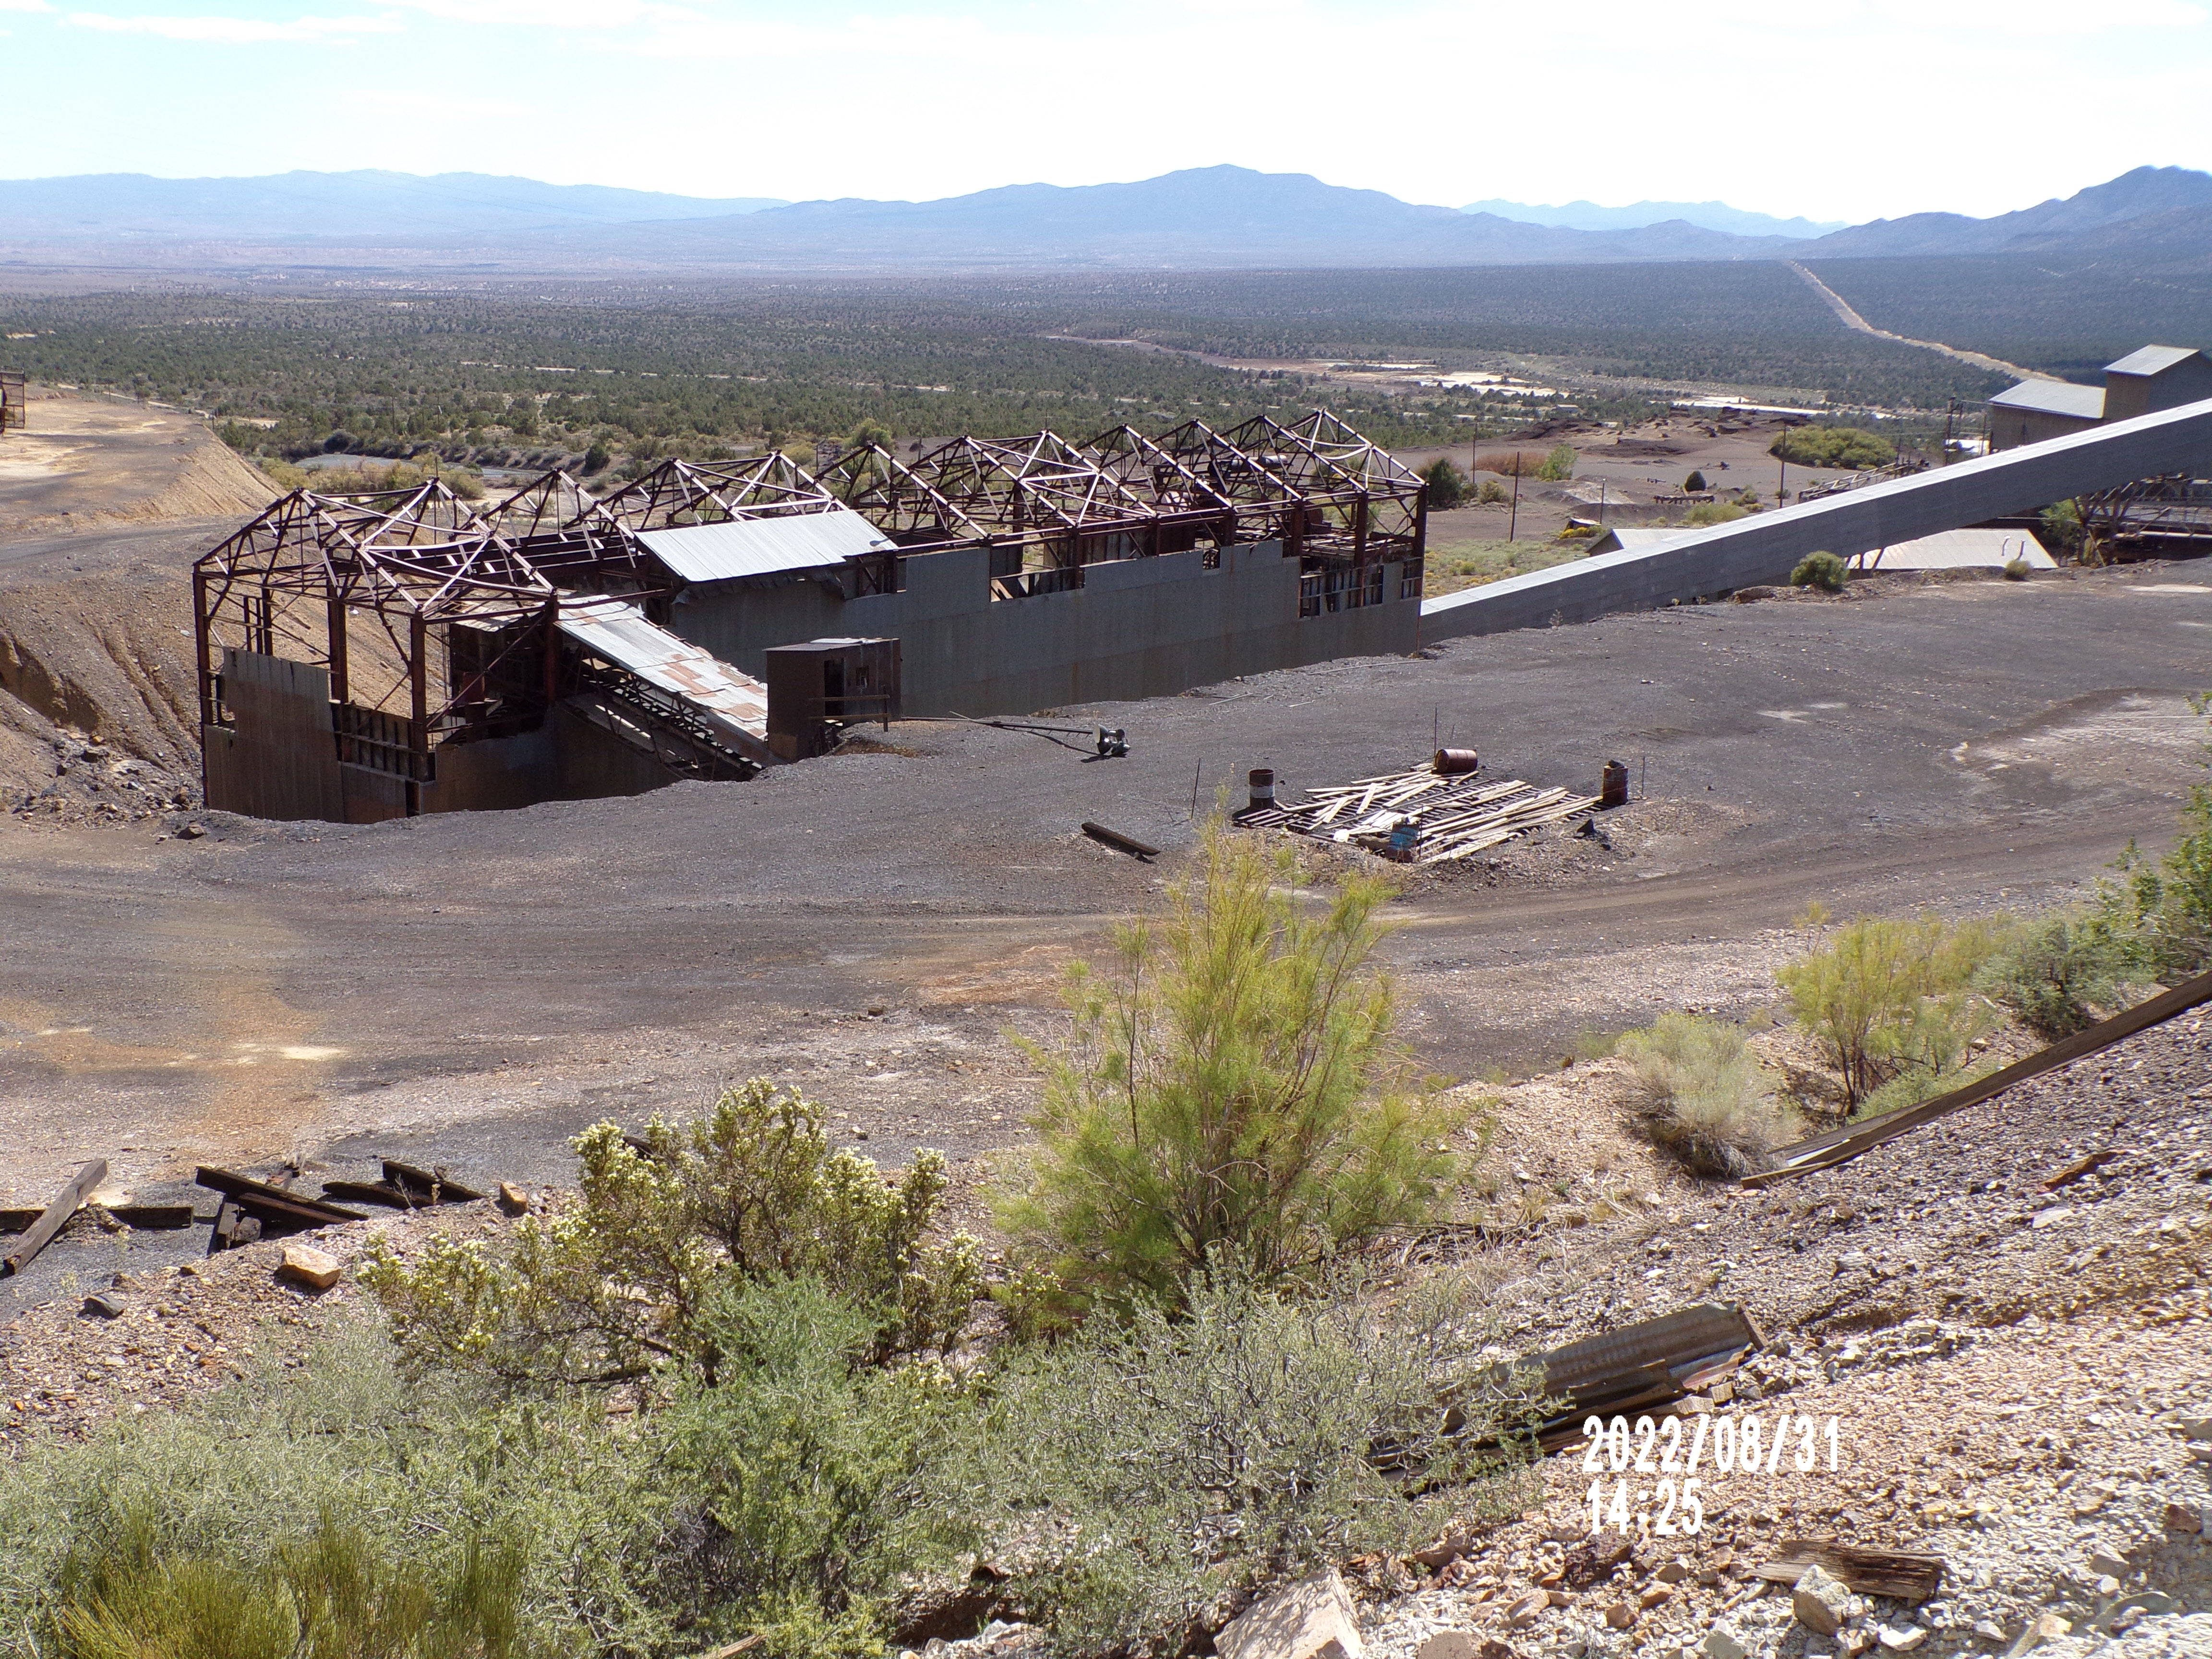 Caselton Mill Site and adjacent tailings in Operable Unit 4 (OU4) near Pioche, Lincoln County, Nevada.